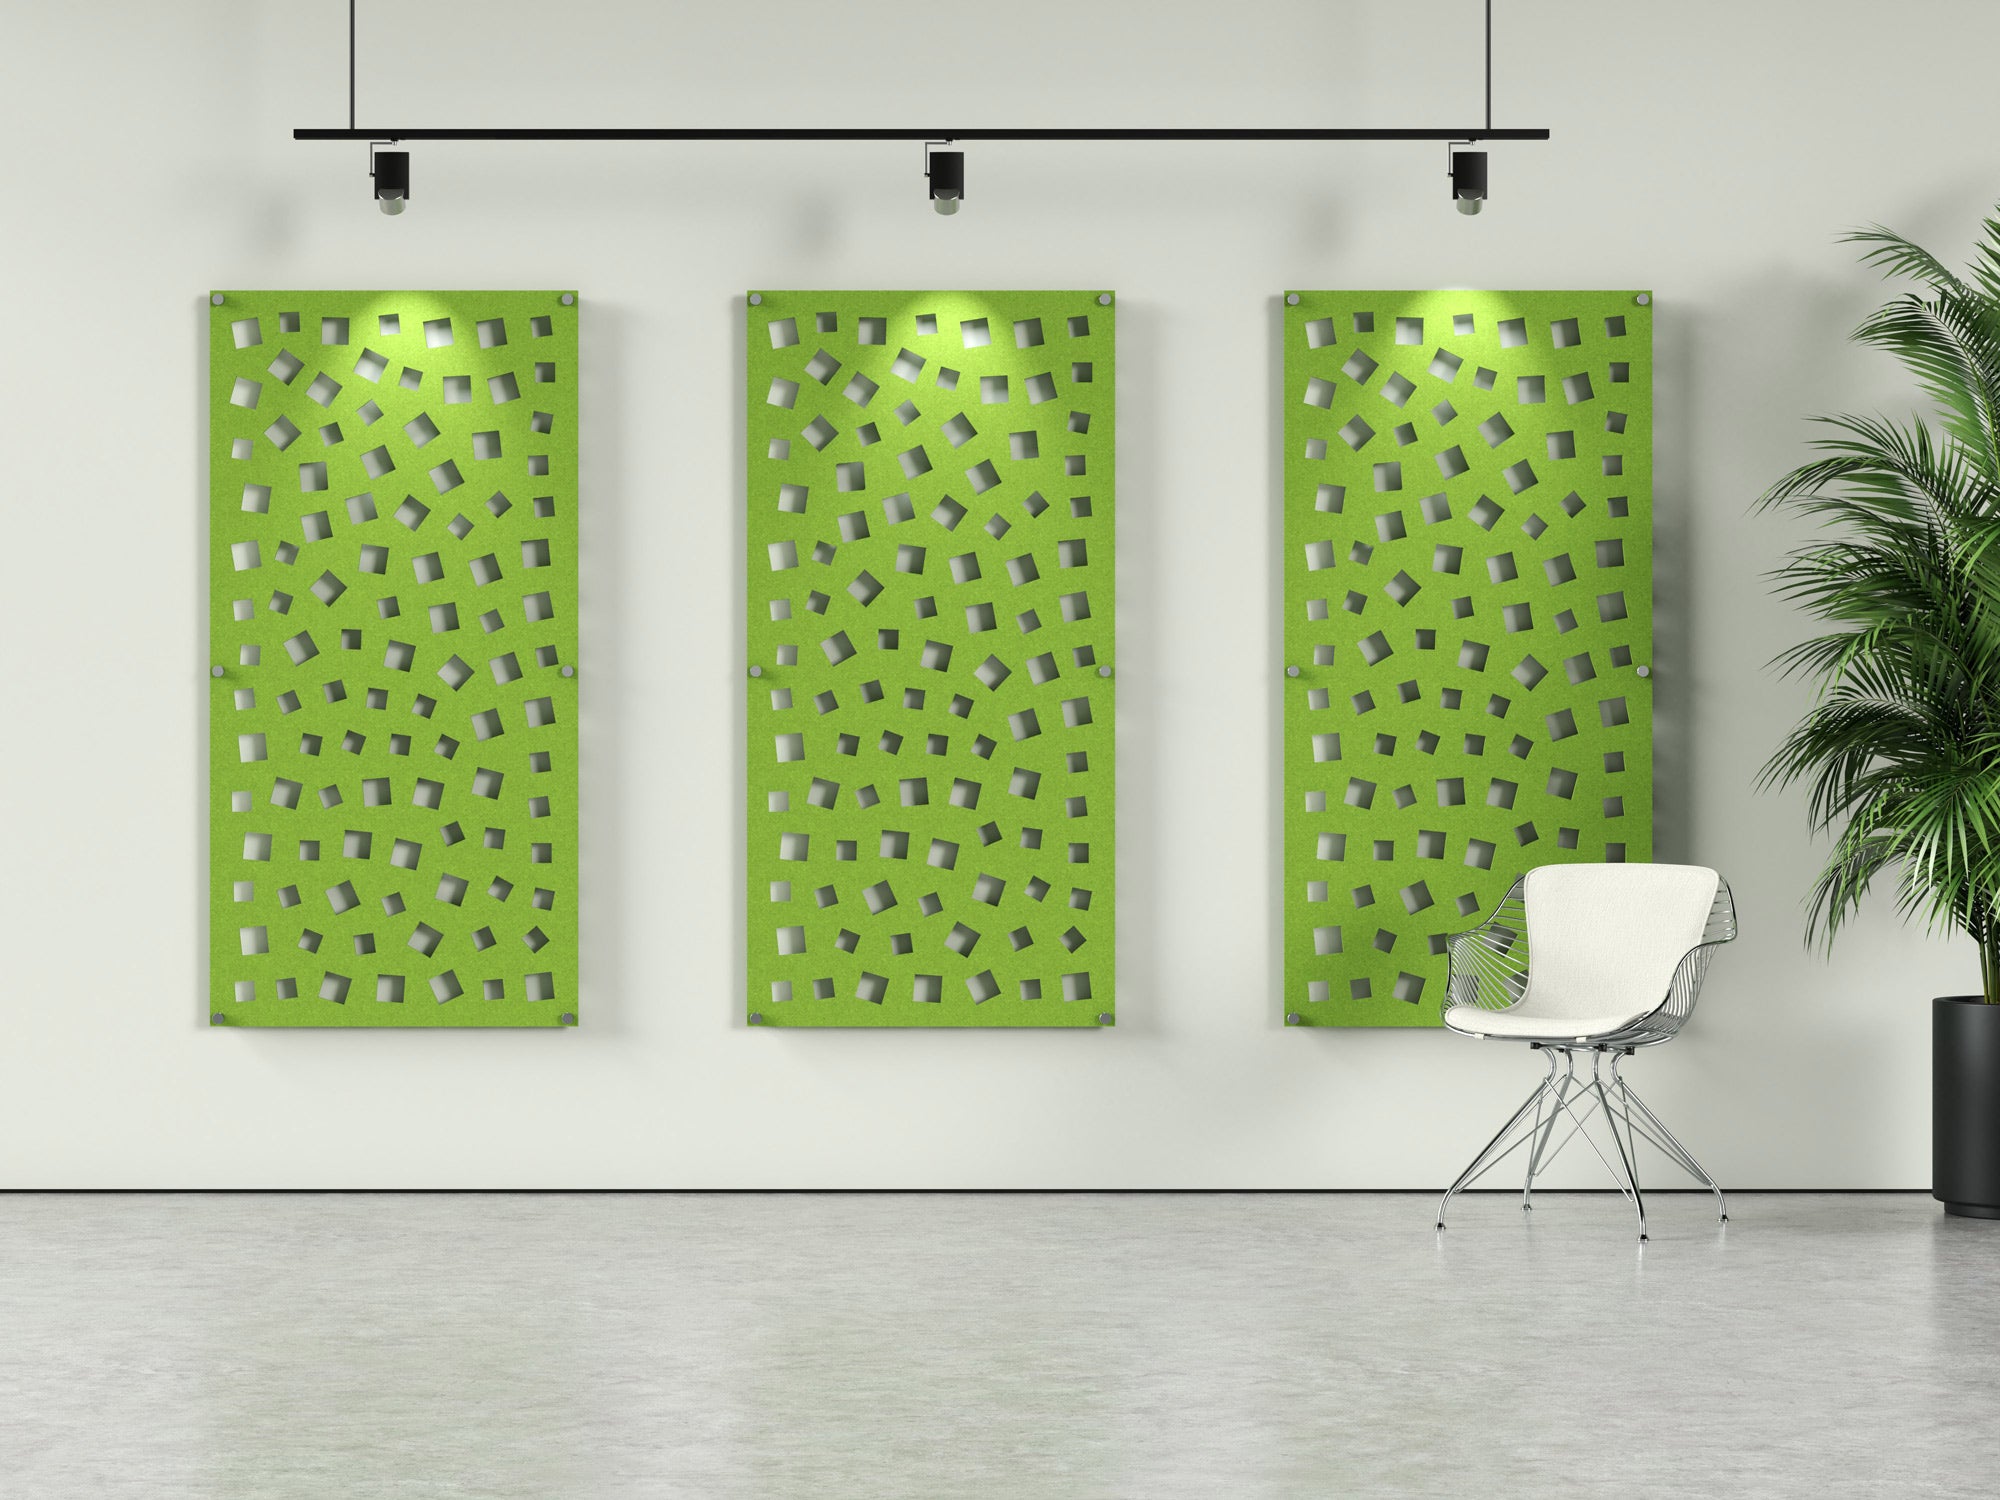 4x8 Acoustic Wall Panel - Squares